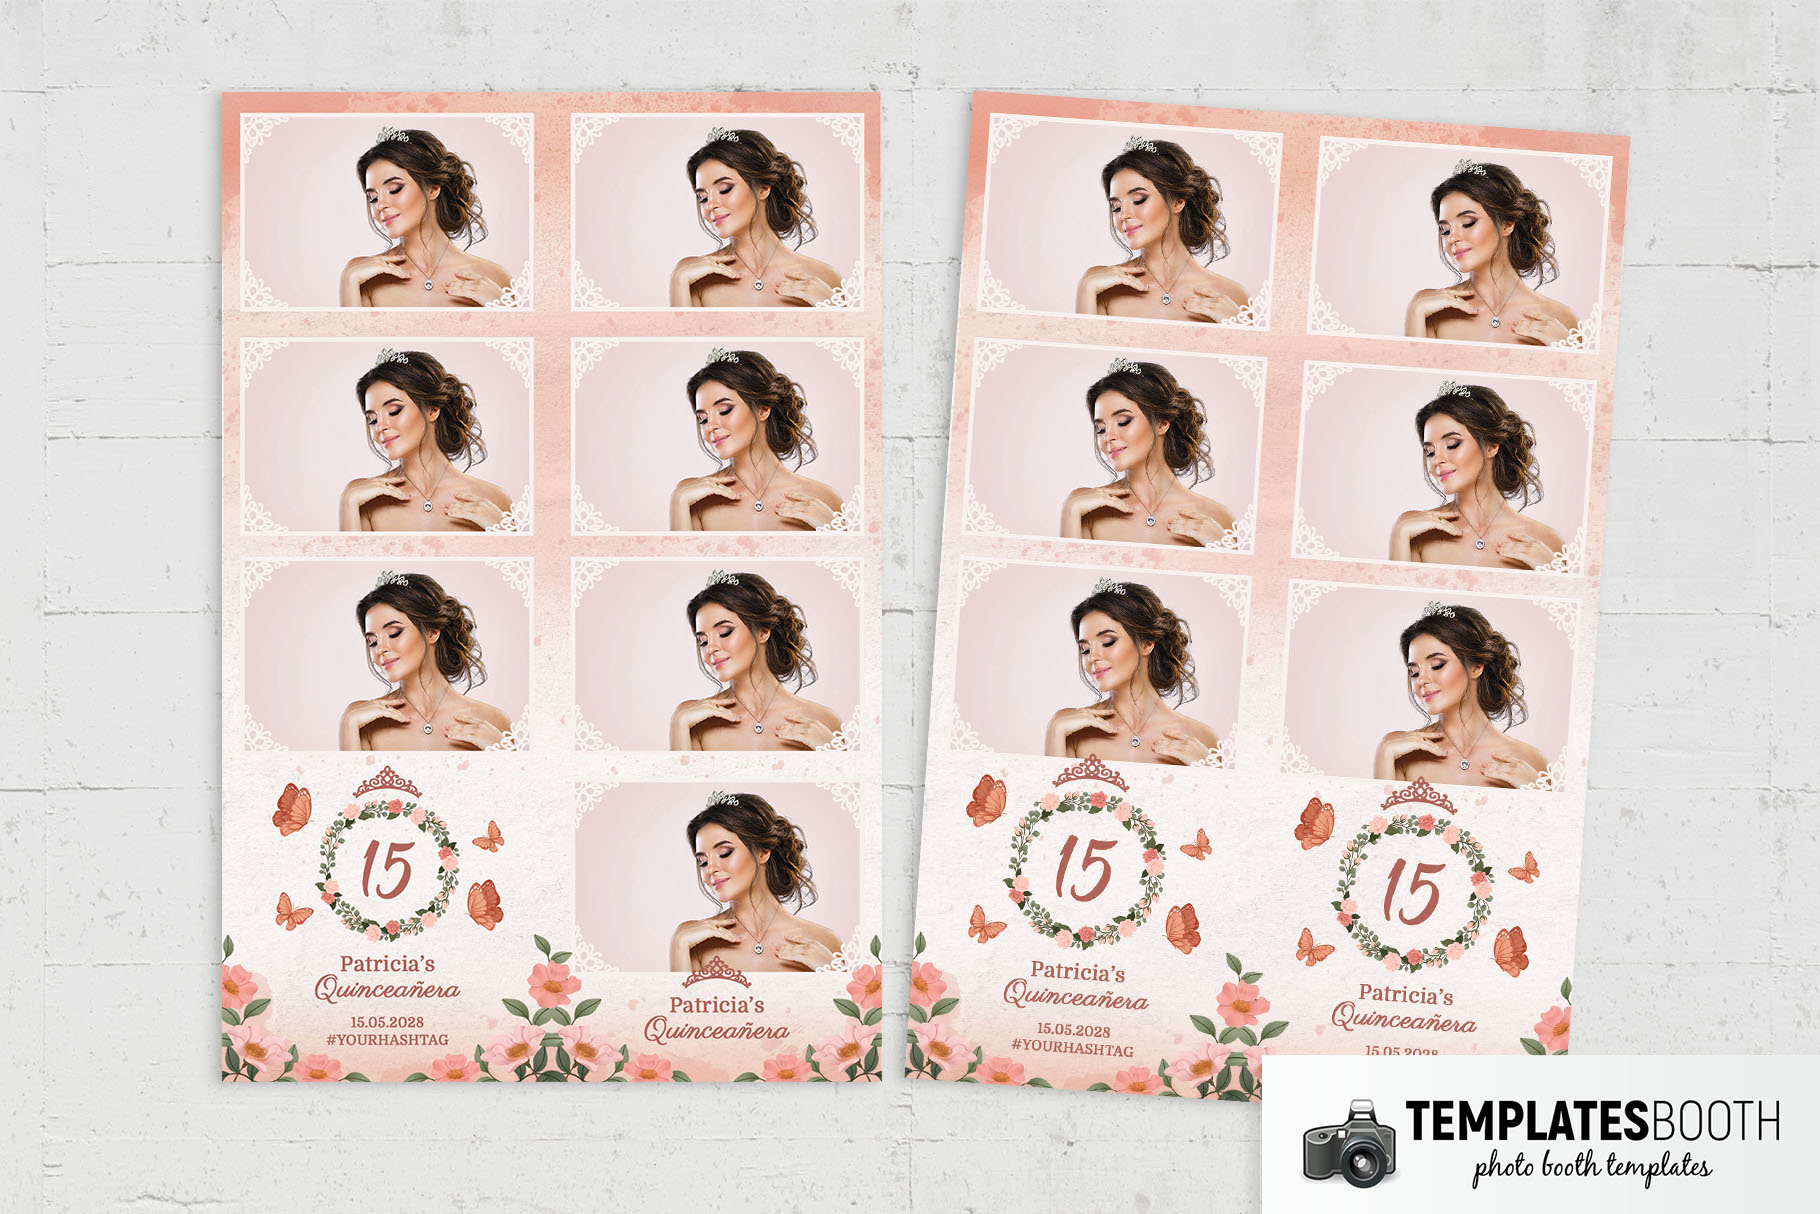 Floral Quinceañera Photo Booth Template